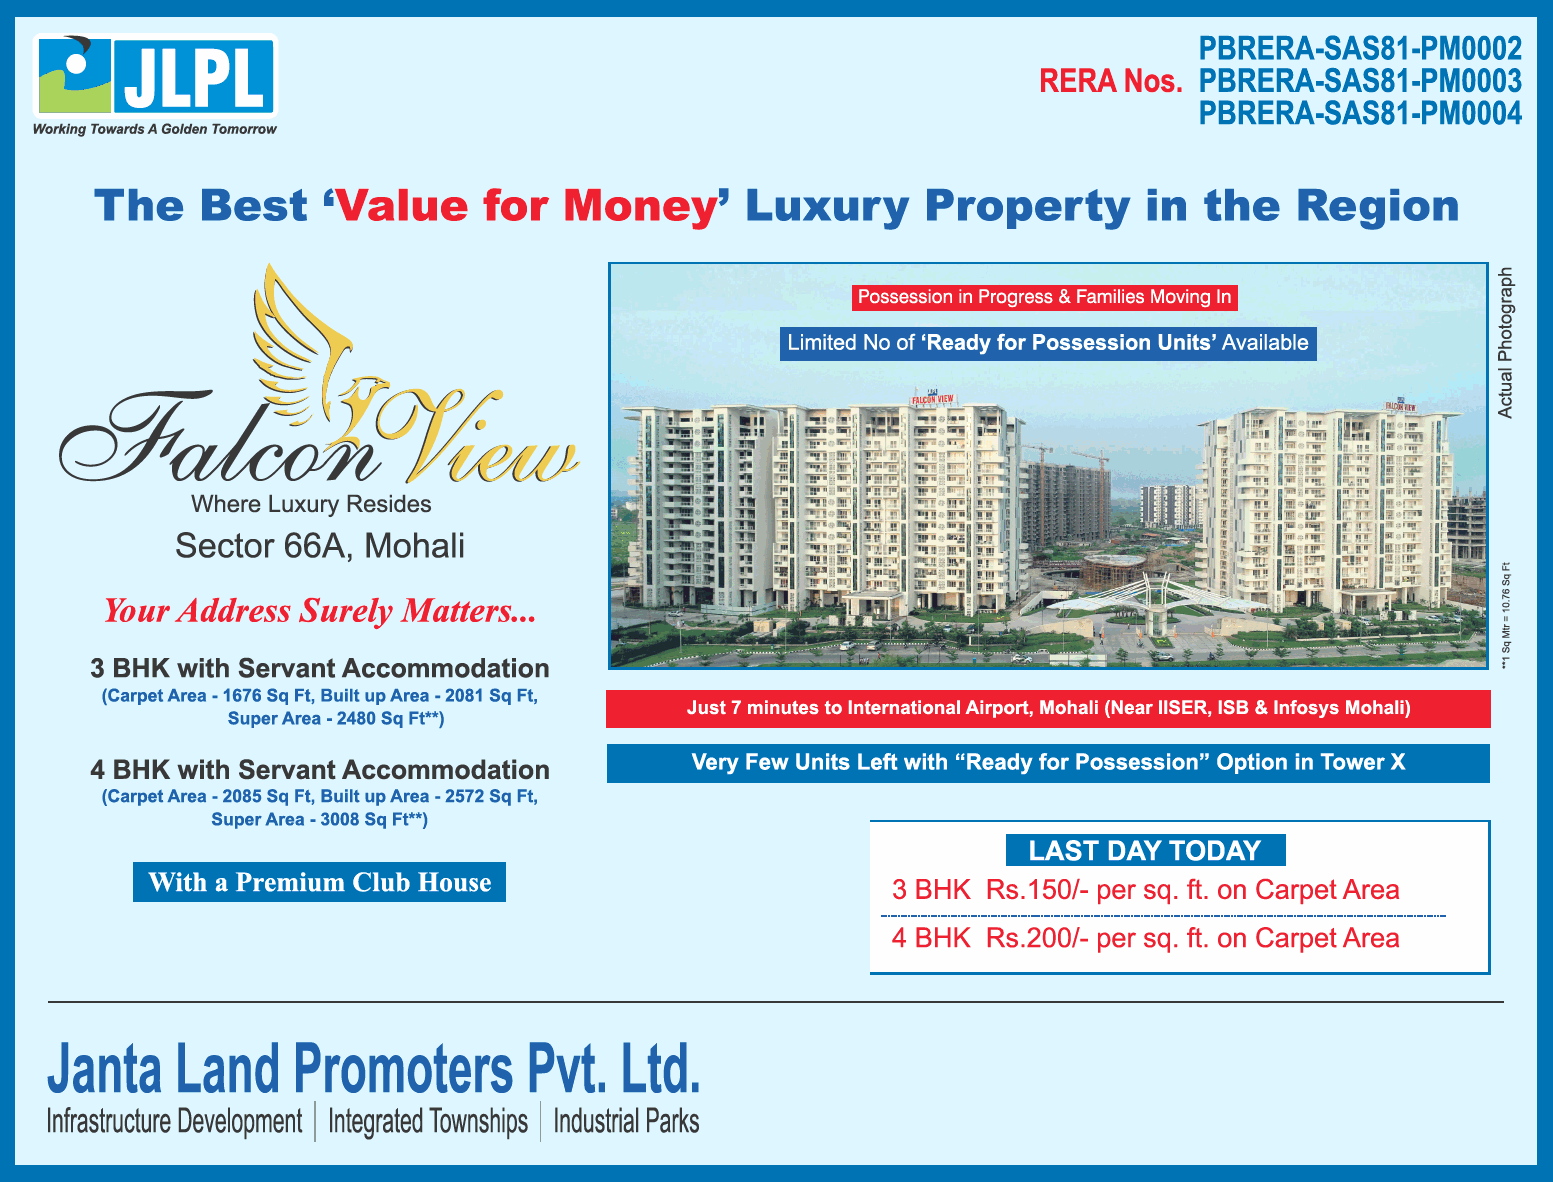 Book 3 & 4 bhk with servant accommodation at JLPL Falcon View in Mohali